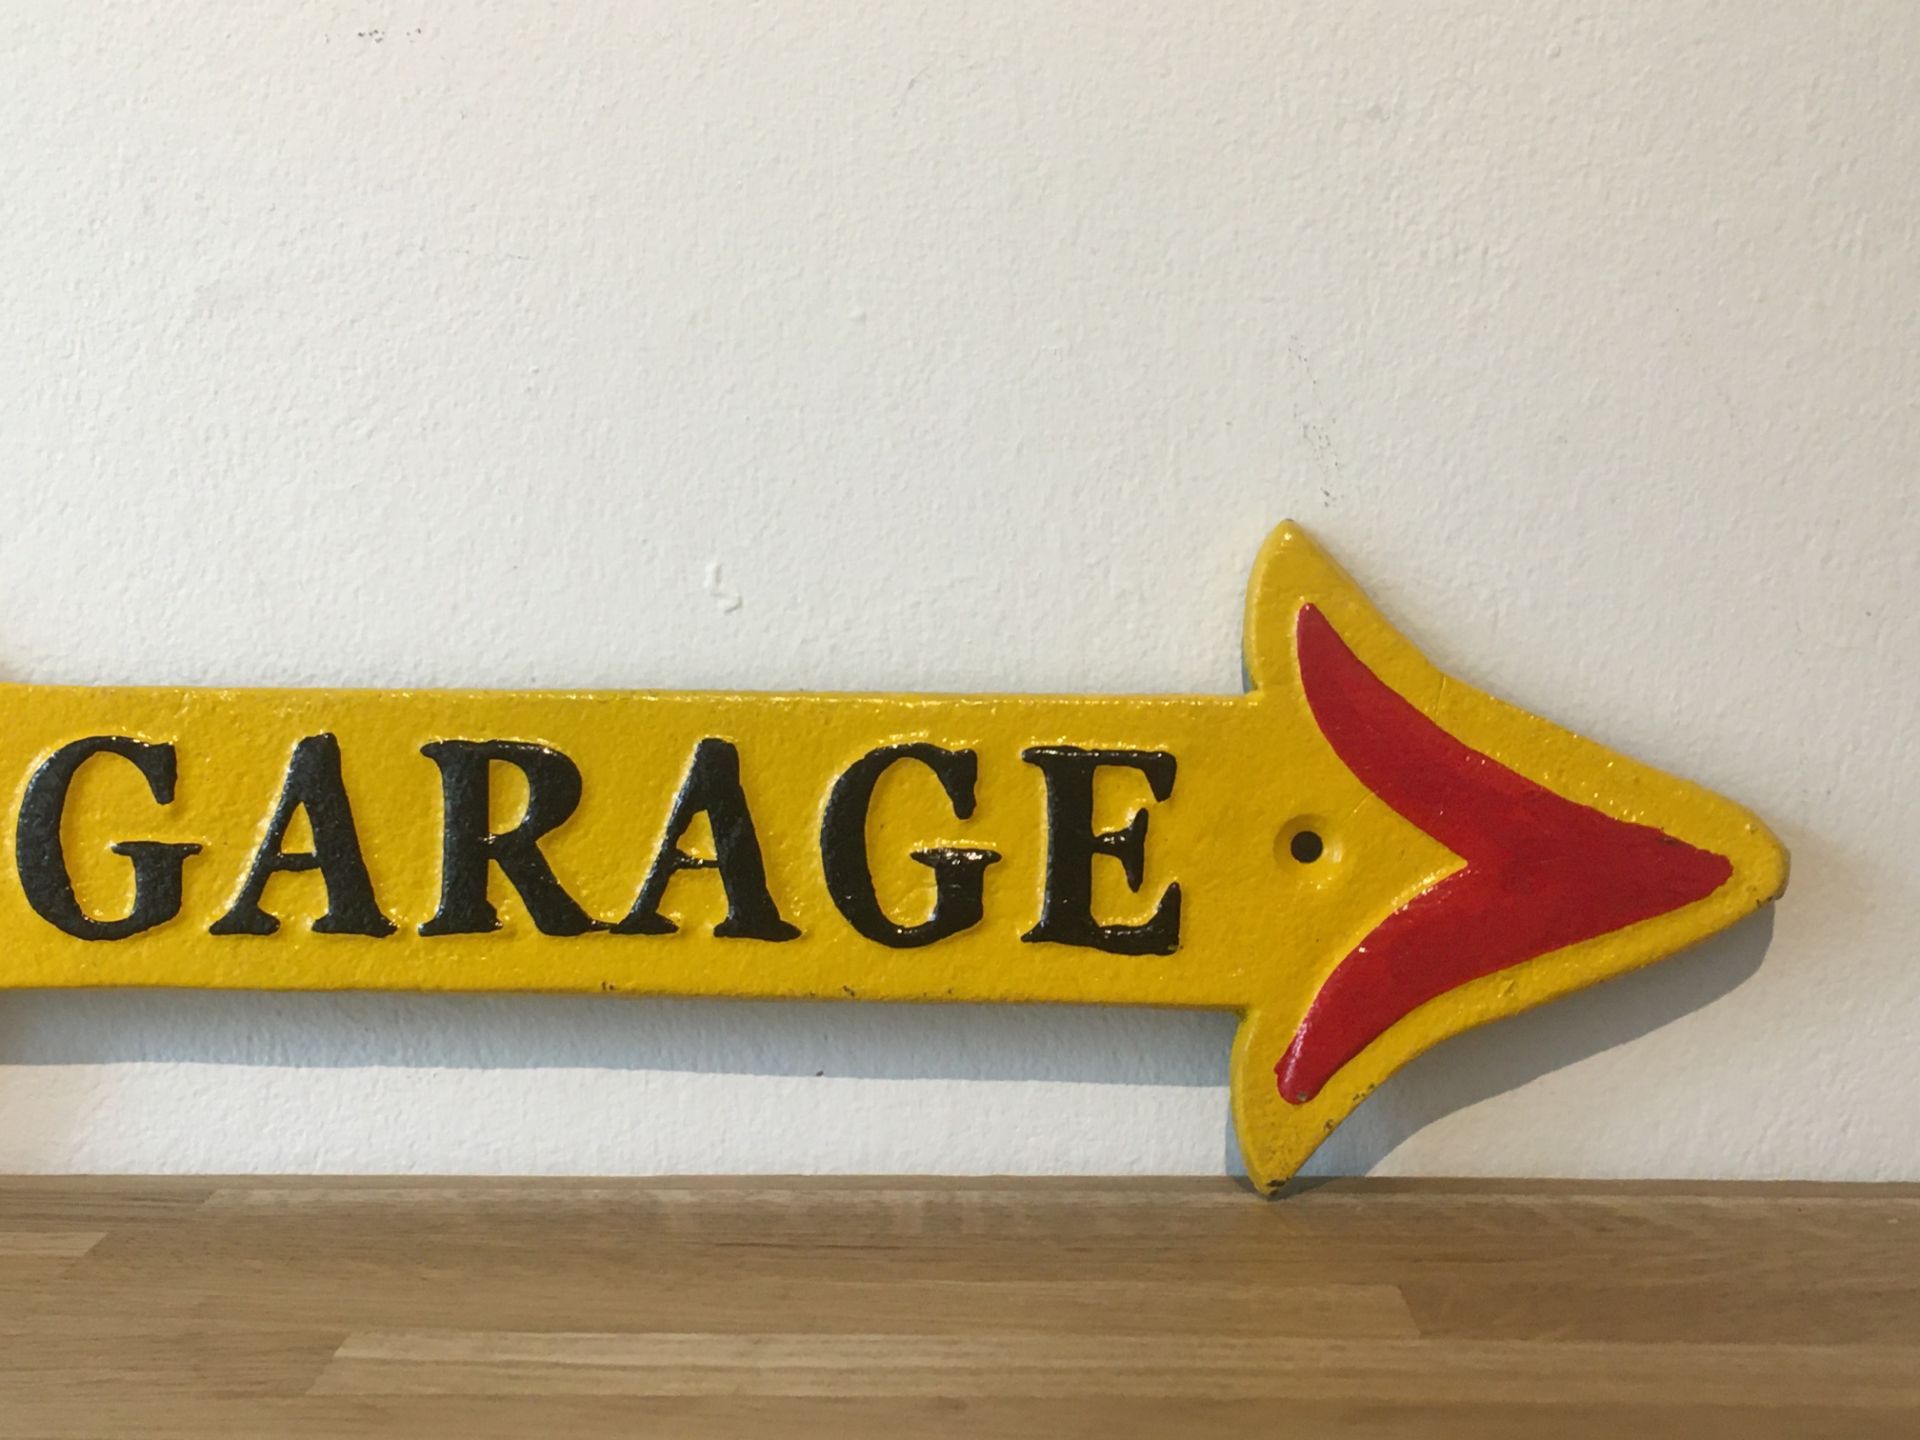 Cast Iron Shell Oil Garage Arrow Sign - Image 3 of 3